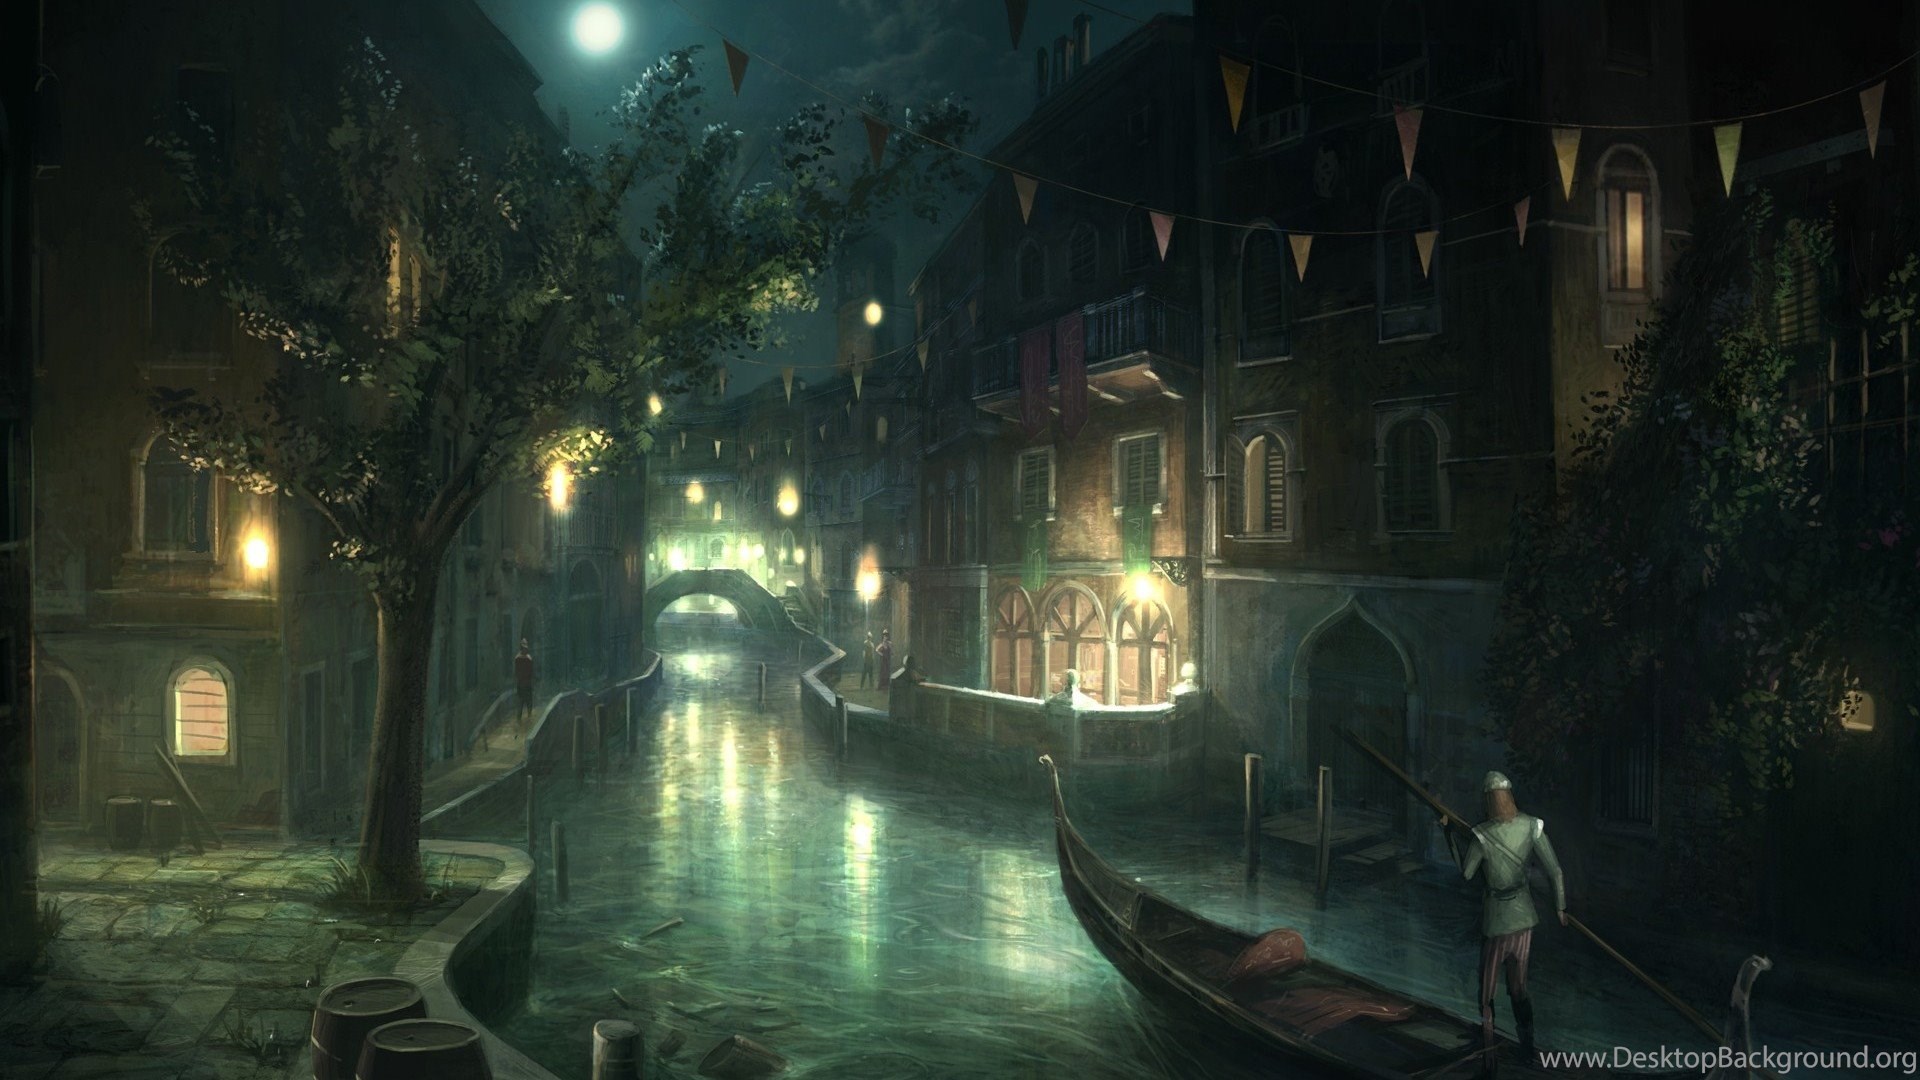 [Event temporel] Time's Clock 1060259_venice-assassins-creed-ii-wallpapers_1920x1080_h